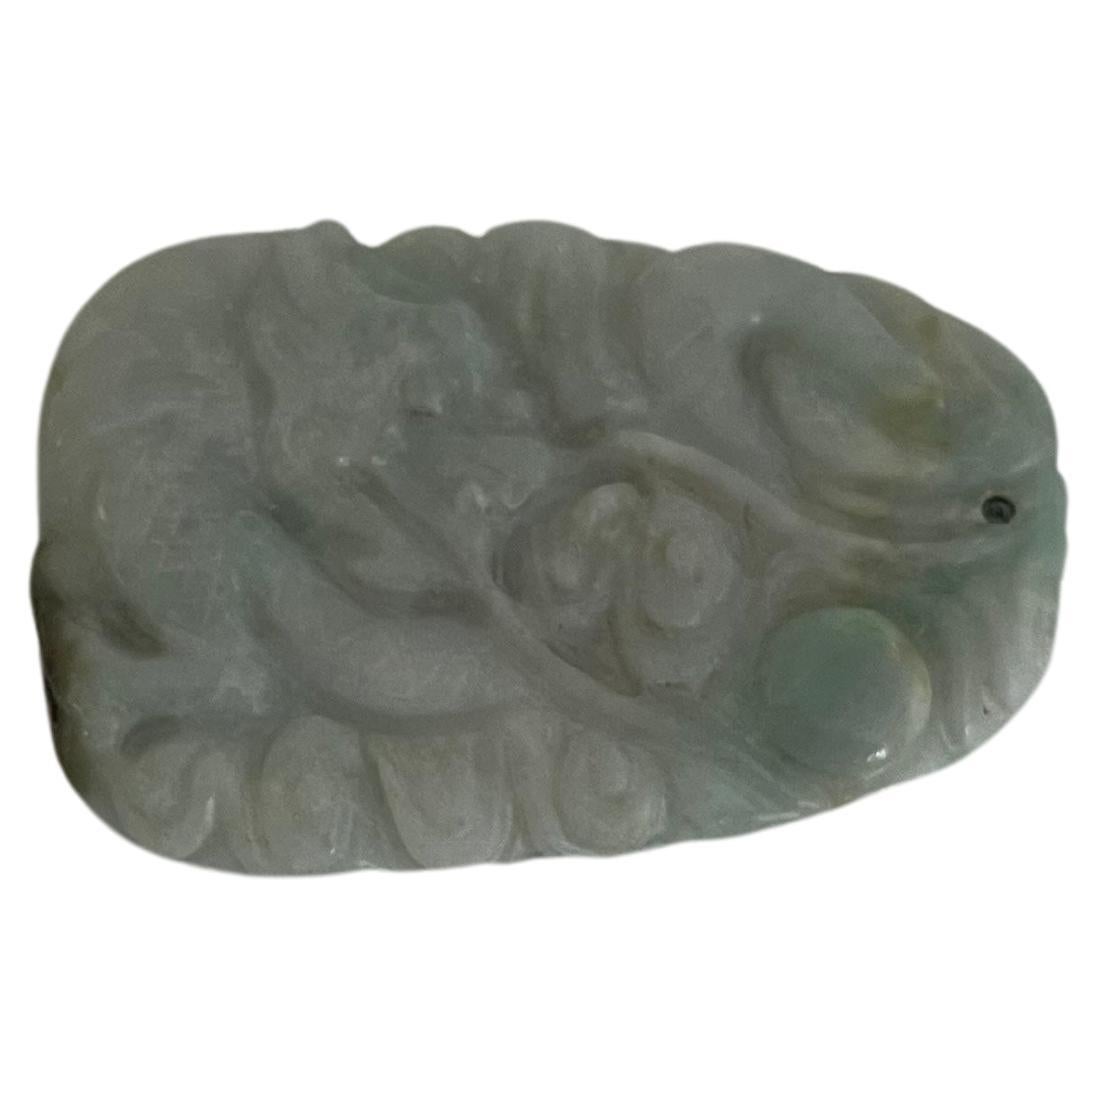 This is a very good Chinese Jade,  Jadeite / Nephrite stone pendant that we date to the early 19th Century, Qing period.

The jade has various colours within the stone, mainly a very pale dove grey with a soft light turquoise blue-green (more